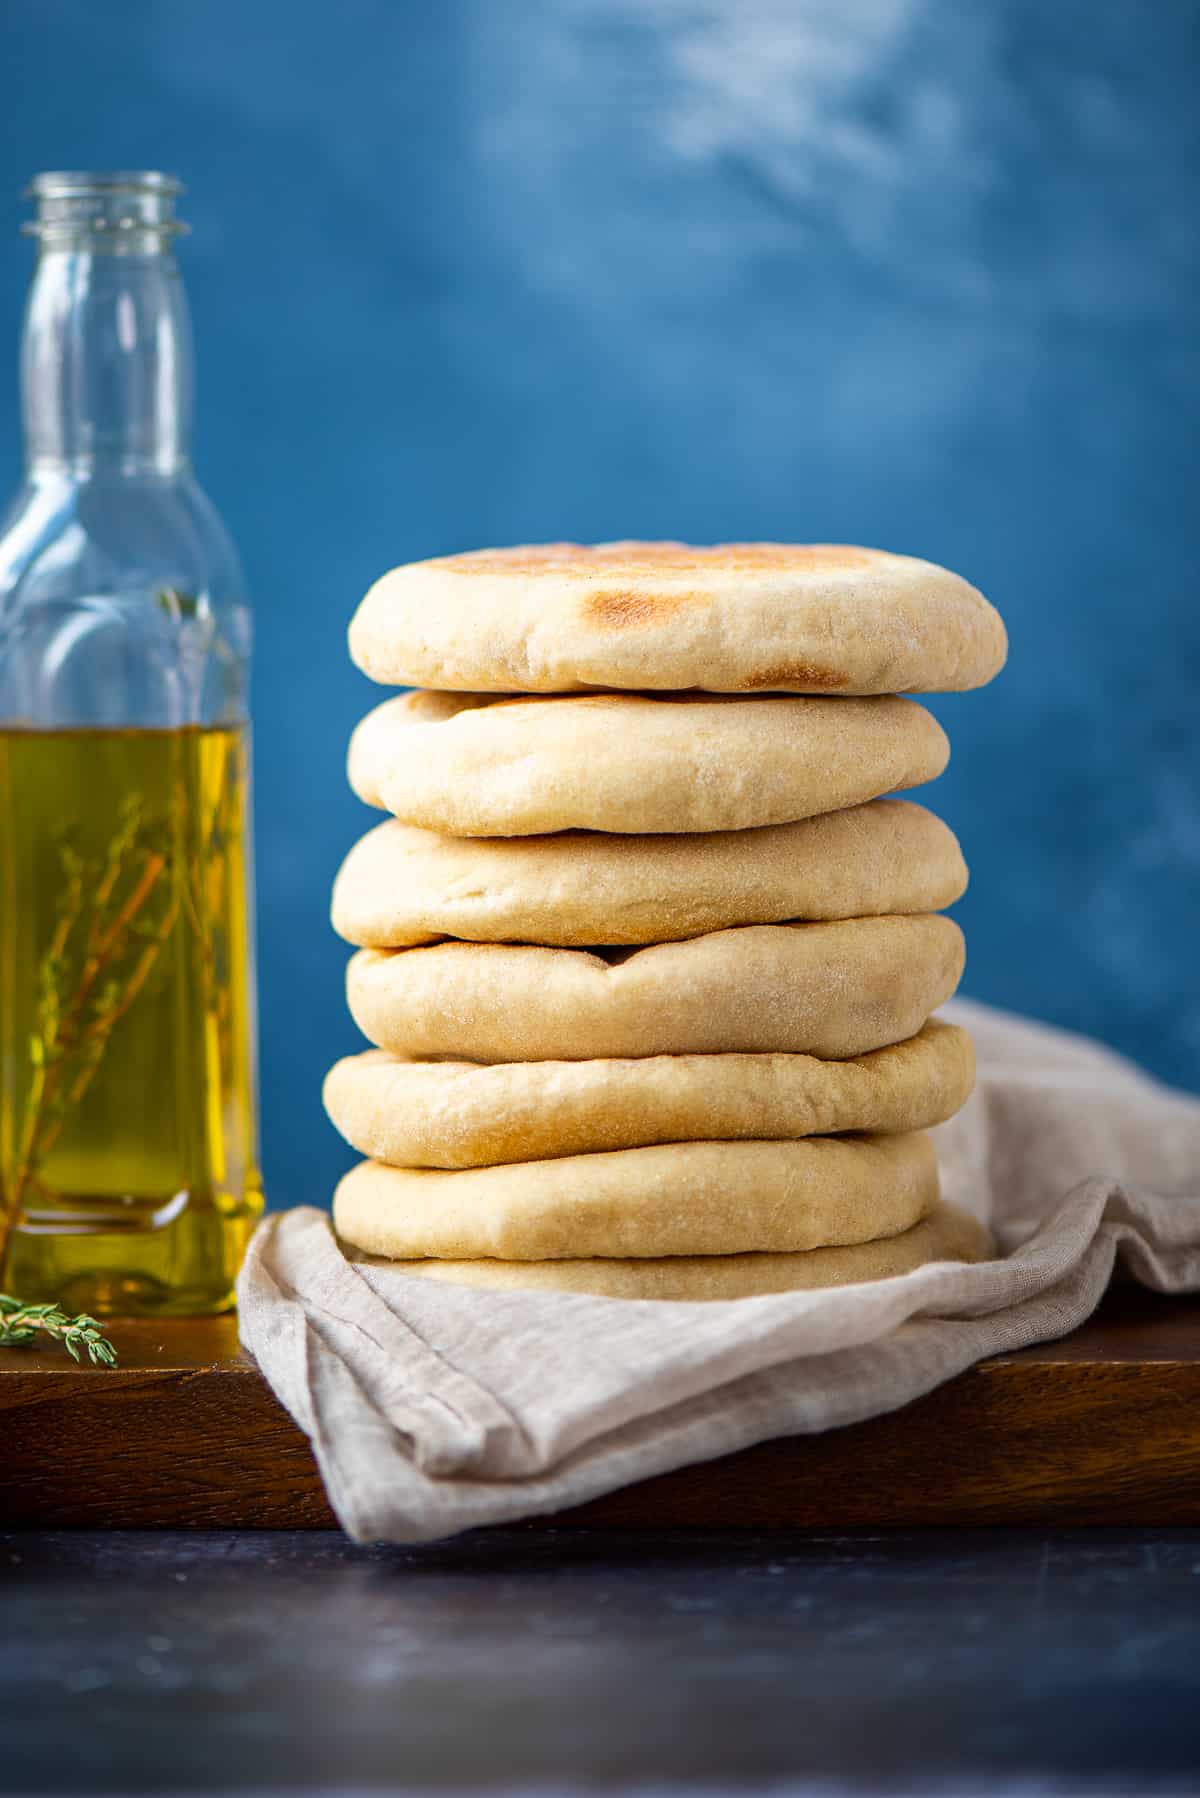 A stack of flatbreads on a napkin and a bottle of olive oil on the side.